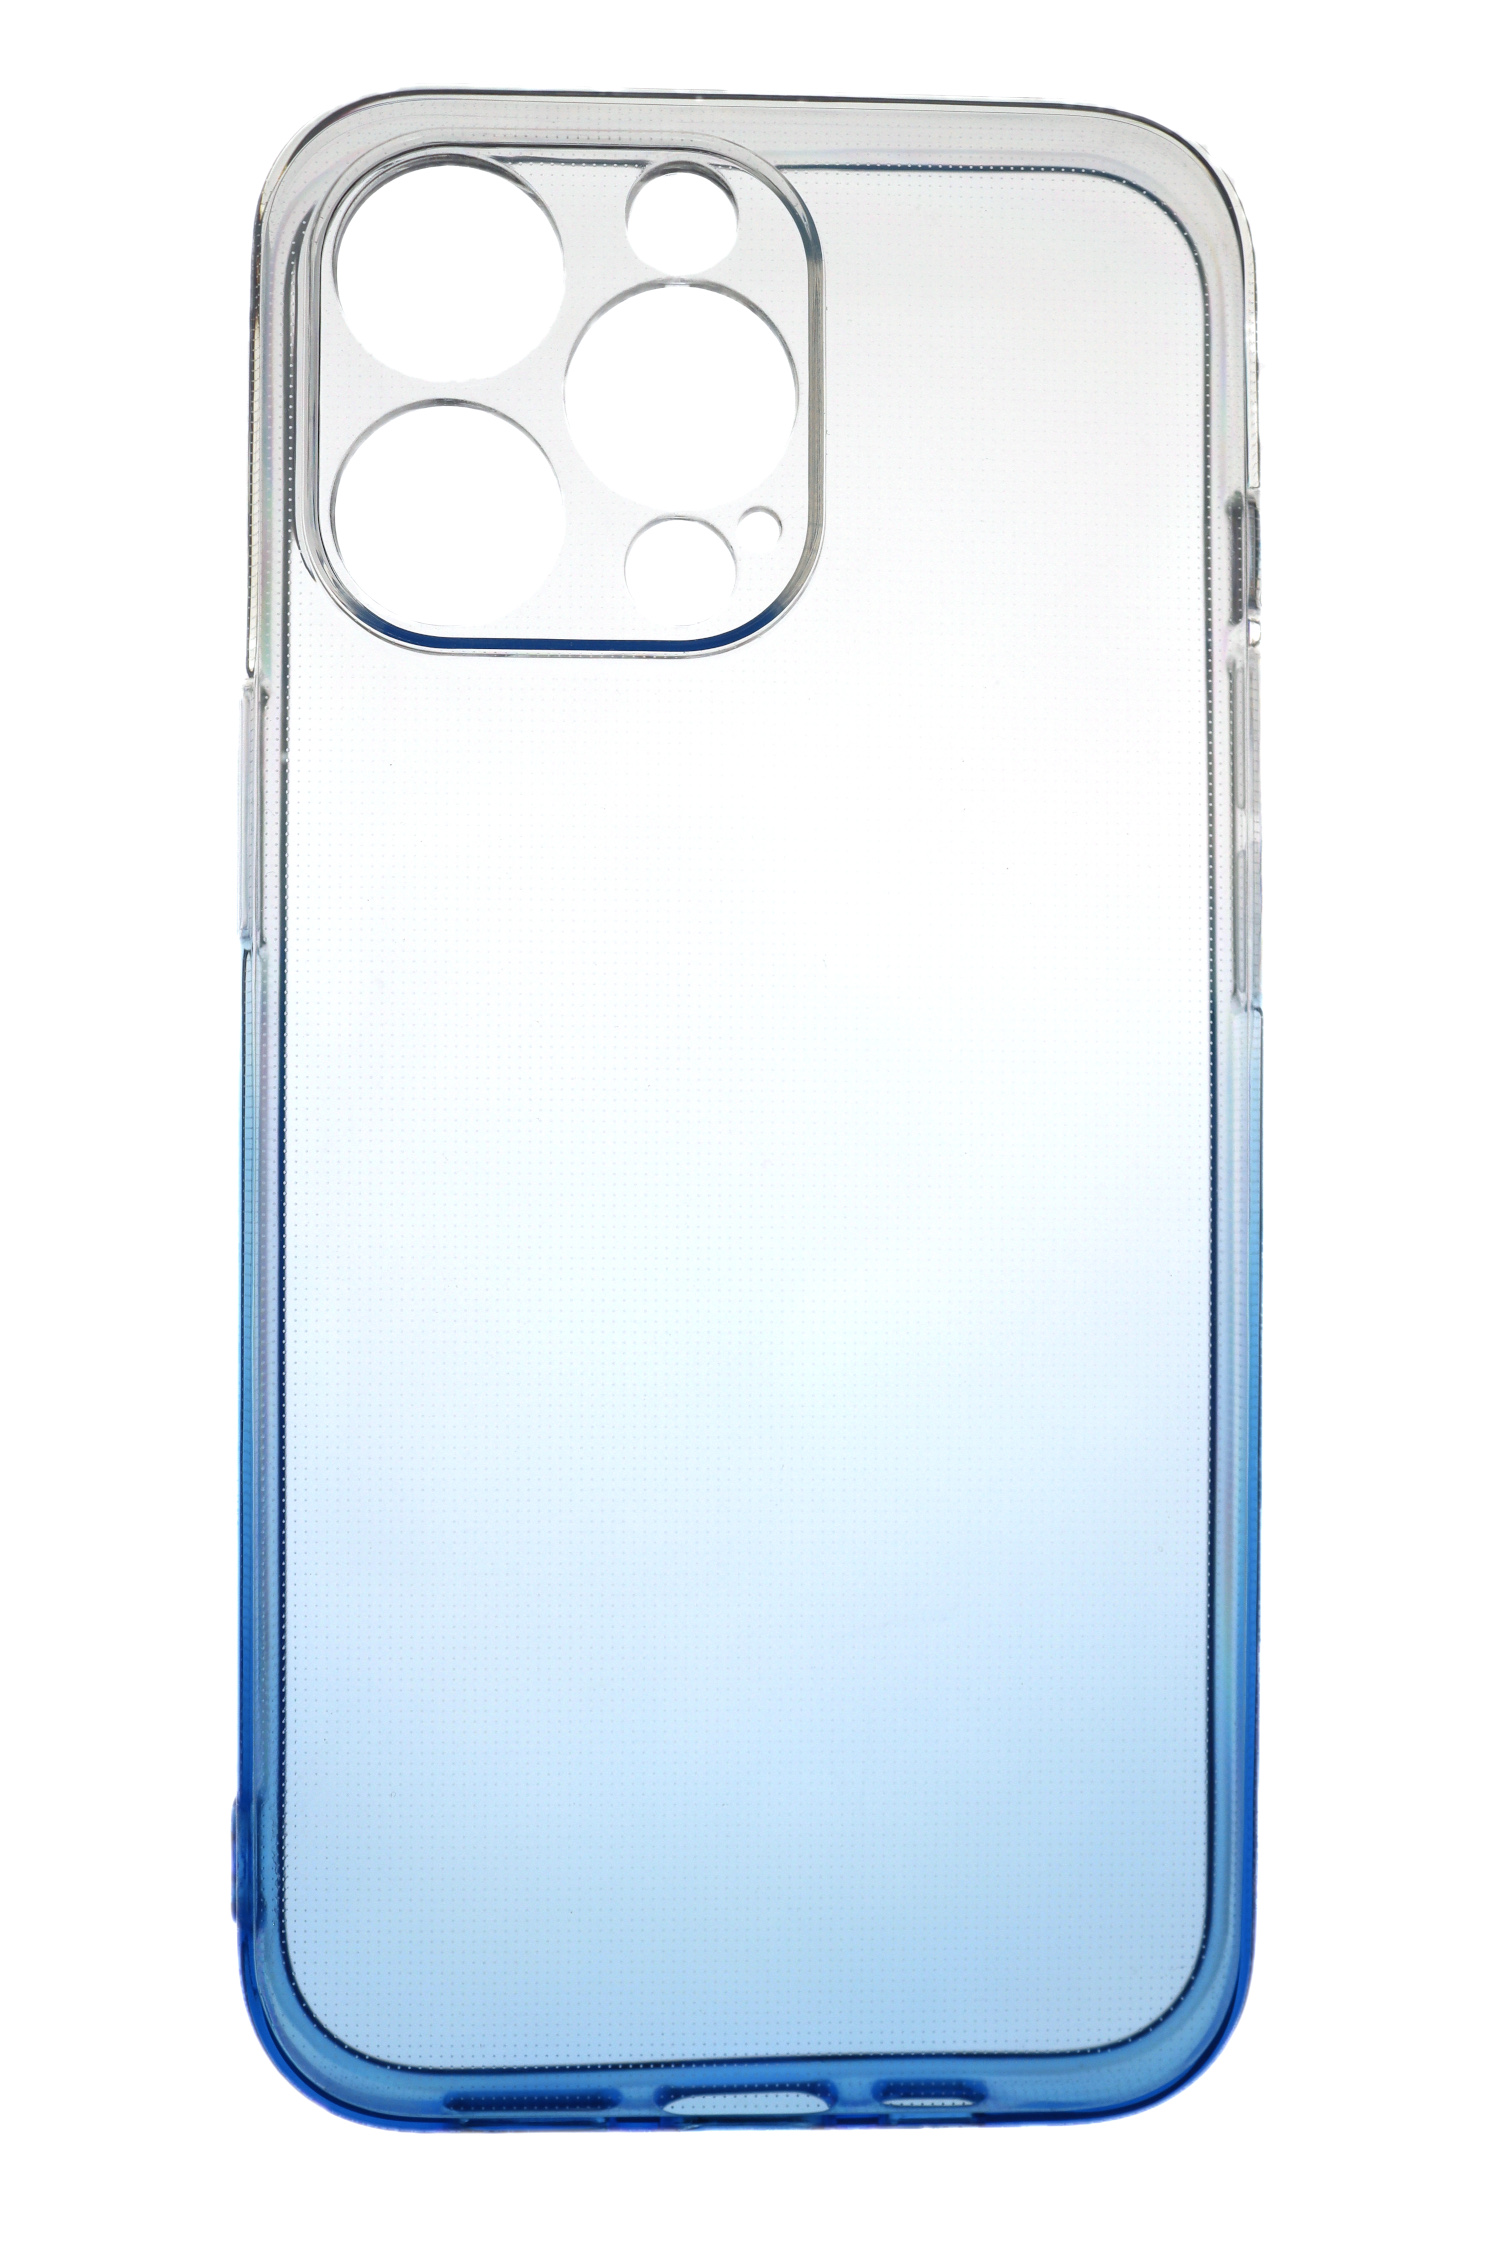 Max, Blau, JAMCOVER iPhone Case Strong, Backcover, Pro Apple, 14 TPU 2.0 mm Transparent